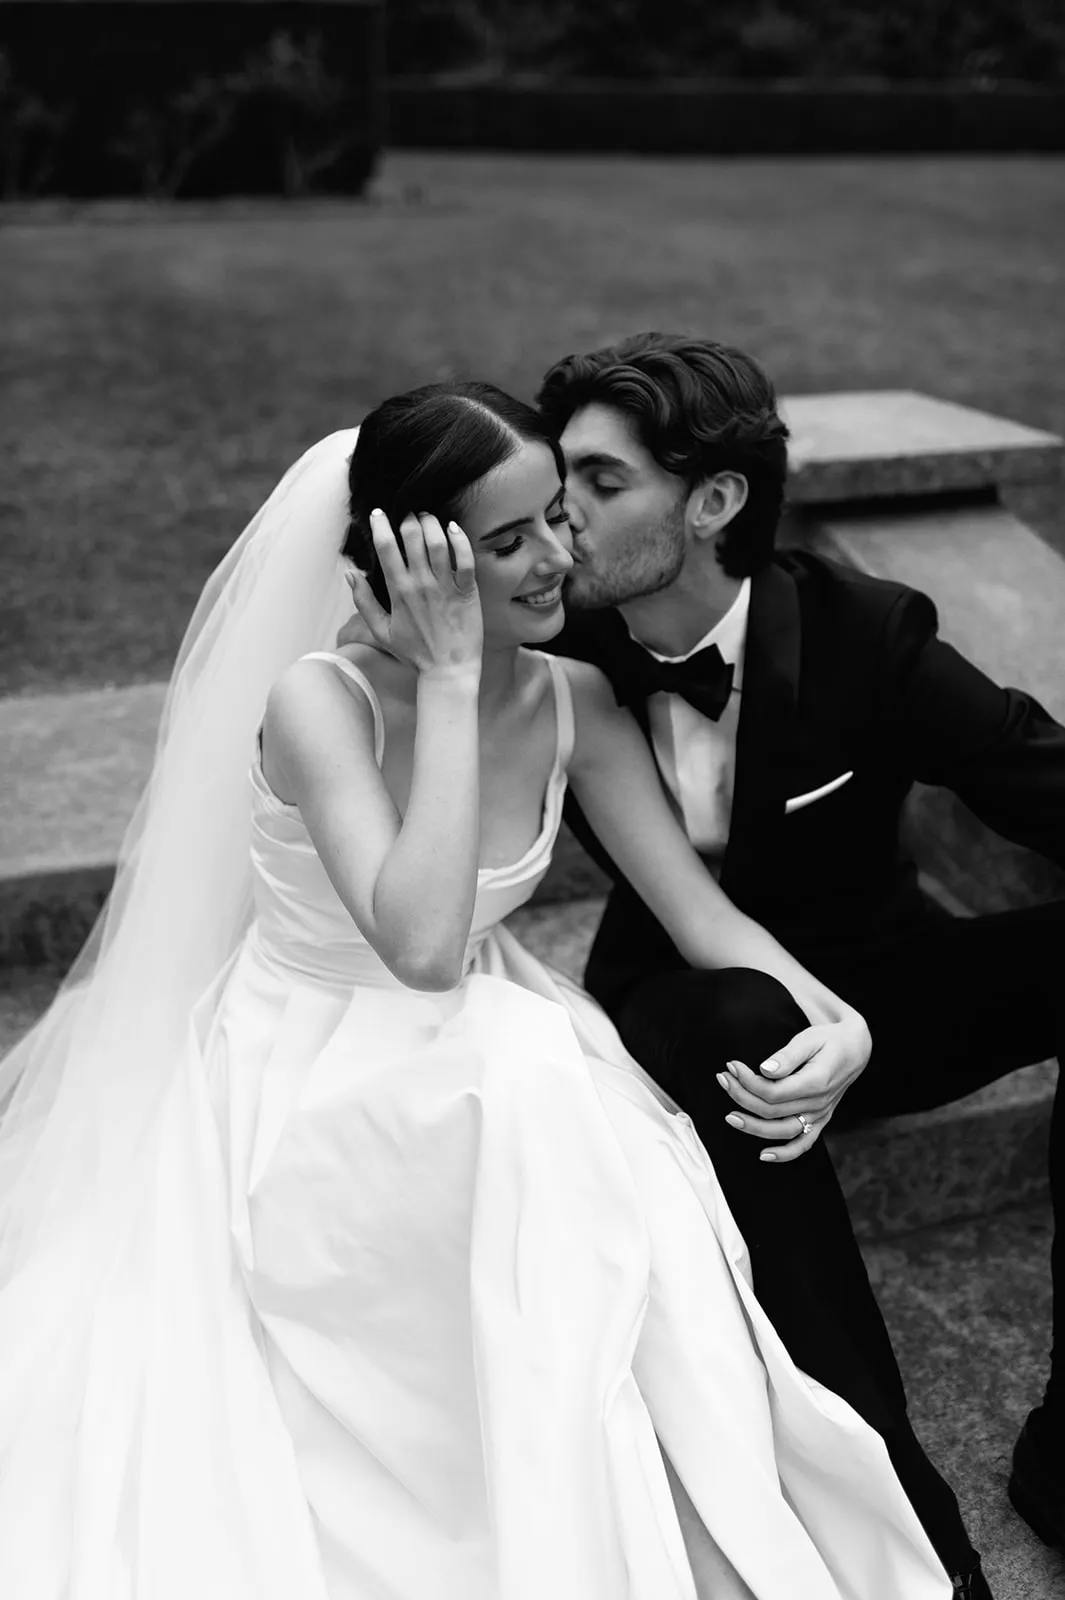 A bride in a white dress and veil sits on steps, smiling, as a groom in a black tuxedo kisses her cheek. Both appear happy and intimate, sharing a tender moment outdoors. The image is in black and white.